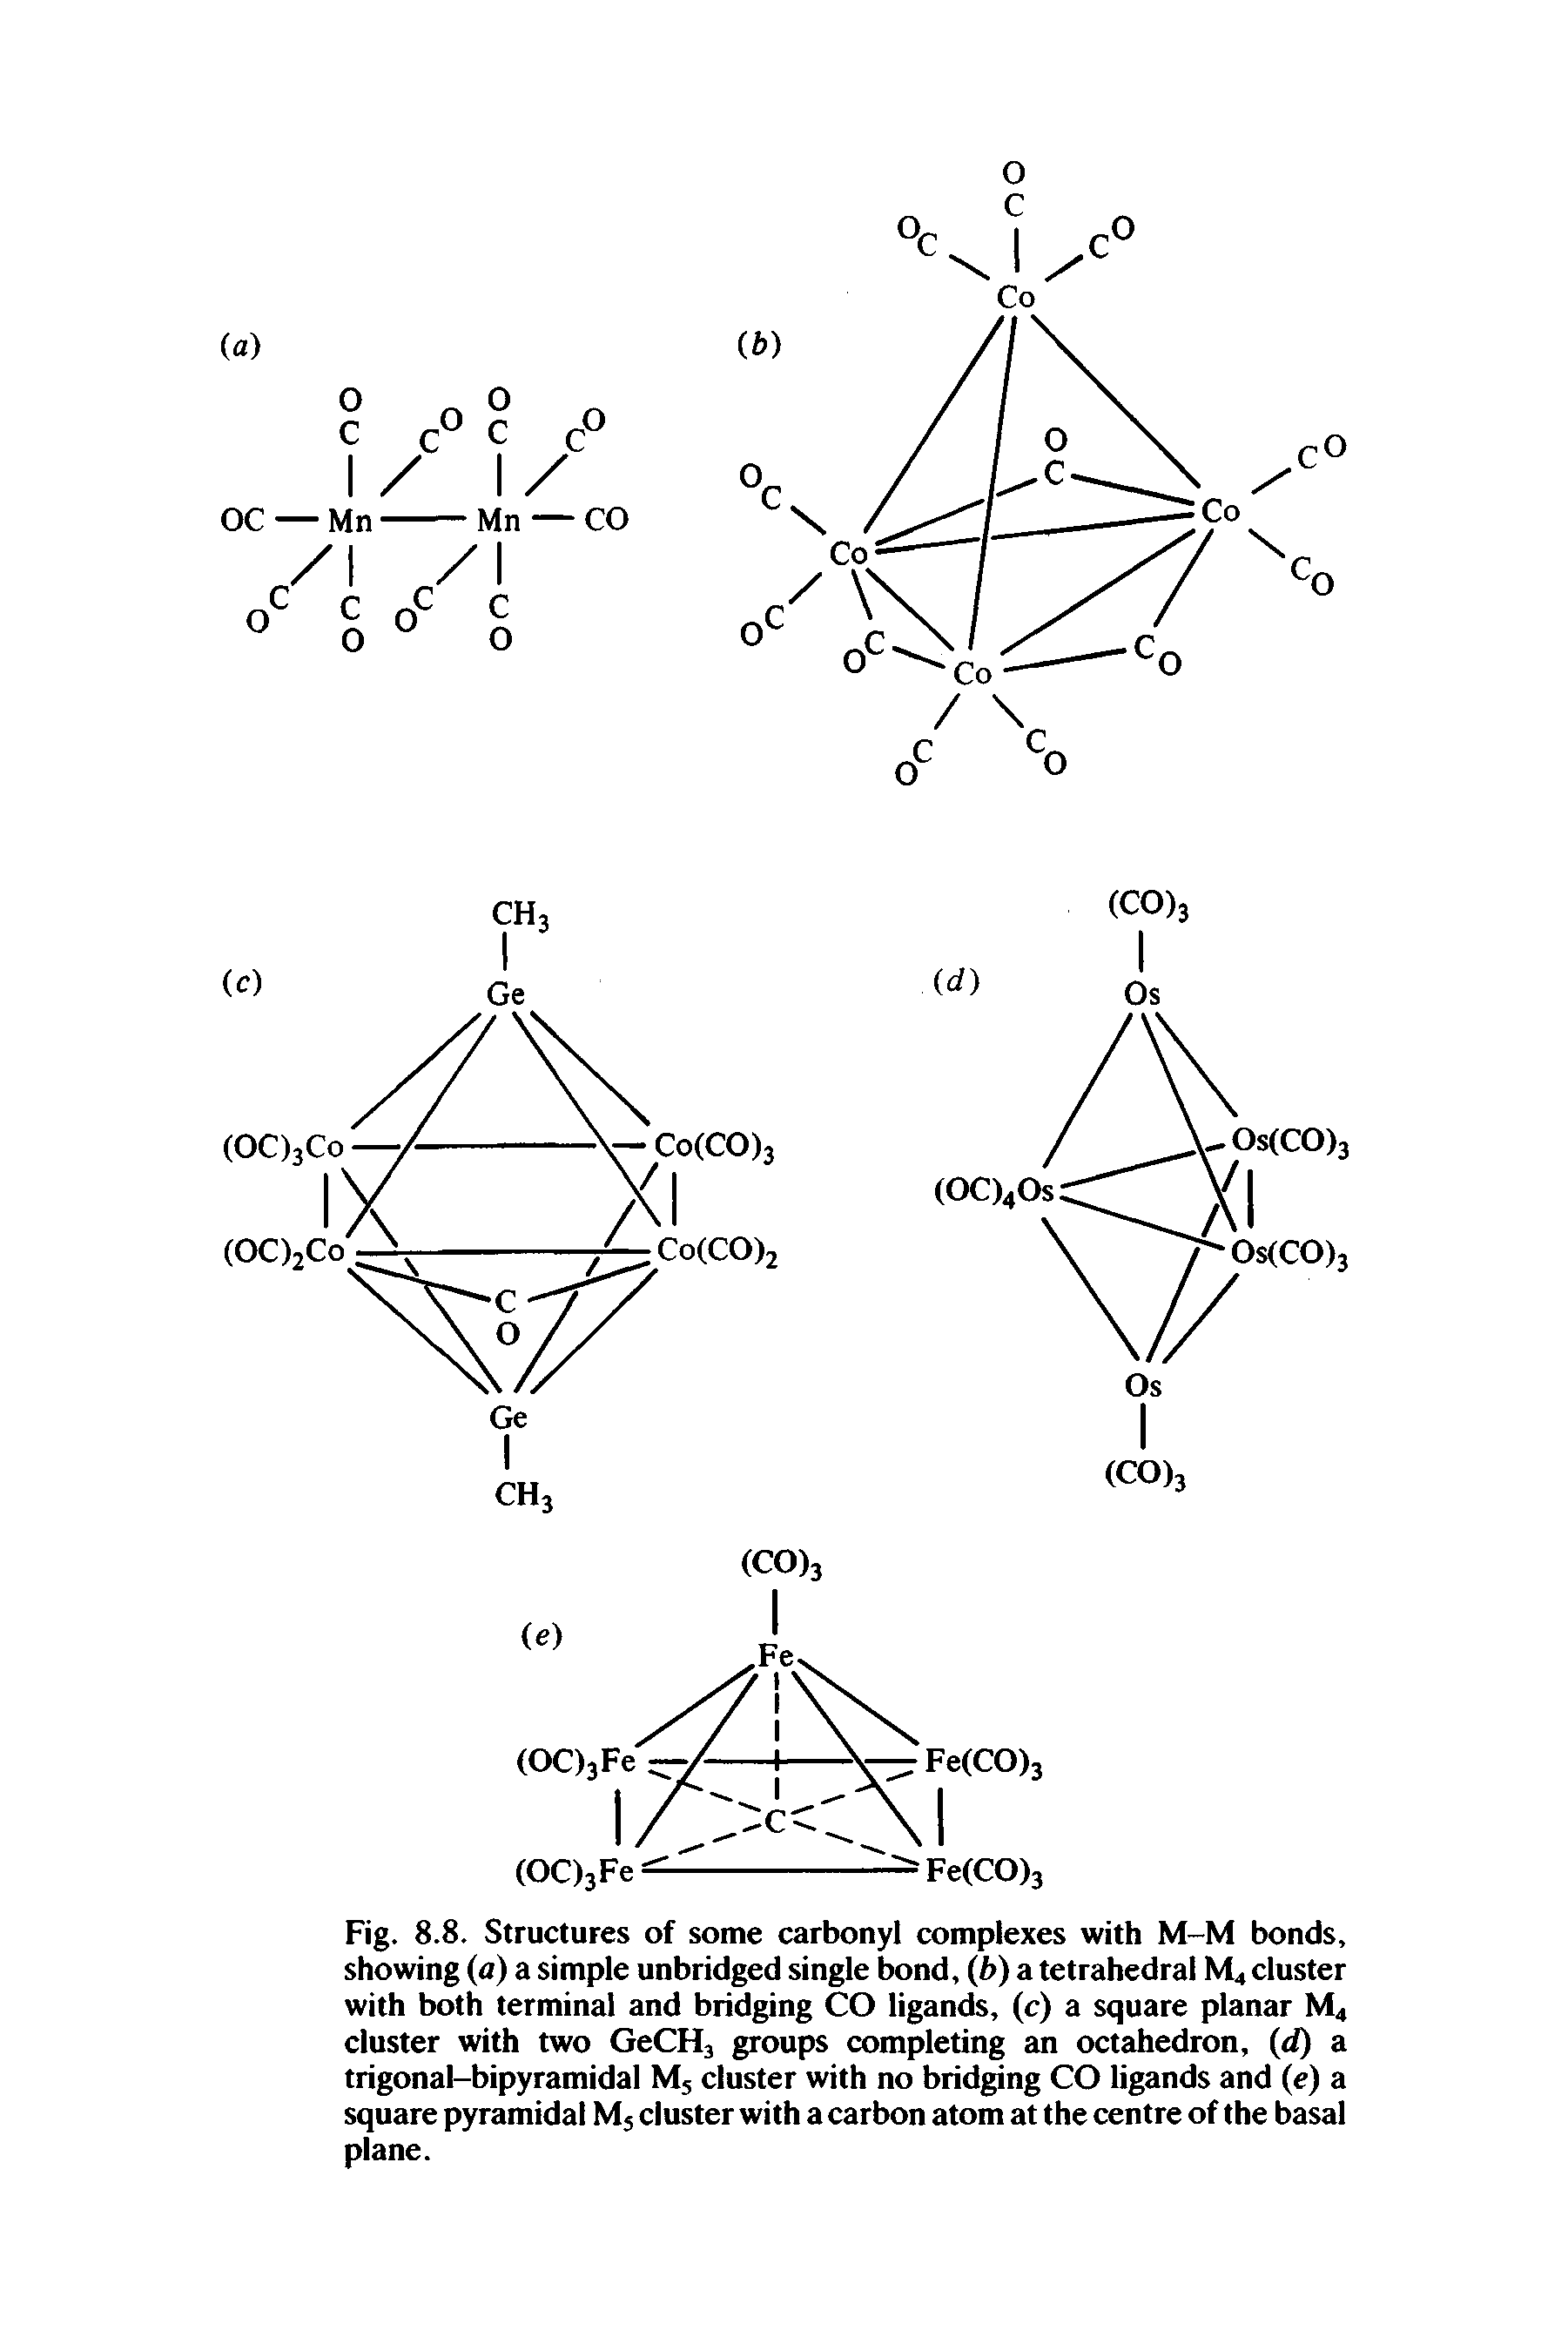 Fig. 8.8. Structures of some carbonyl complexes with M-M bonds, showing (a) a simple unbridged single bond, (b) a tetrahedral M4 cluster with both terminal and bridging CO ligands, (c) a square planar M4 cluster with two GeCH3 groups completing an octahedron, (d) a trigonal-bipyramidal M5 cluster with no bridging CO ligands and (e) a square pyramidal Ms cluster with a carbon atom at the centre of the basal plane.